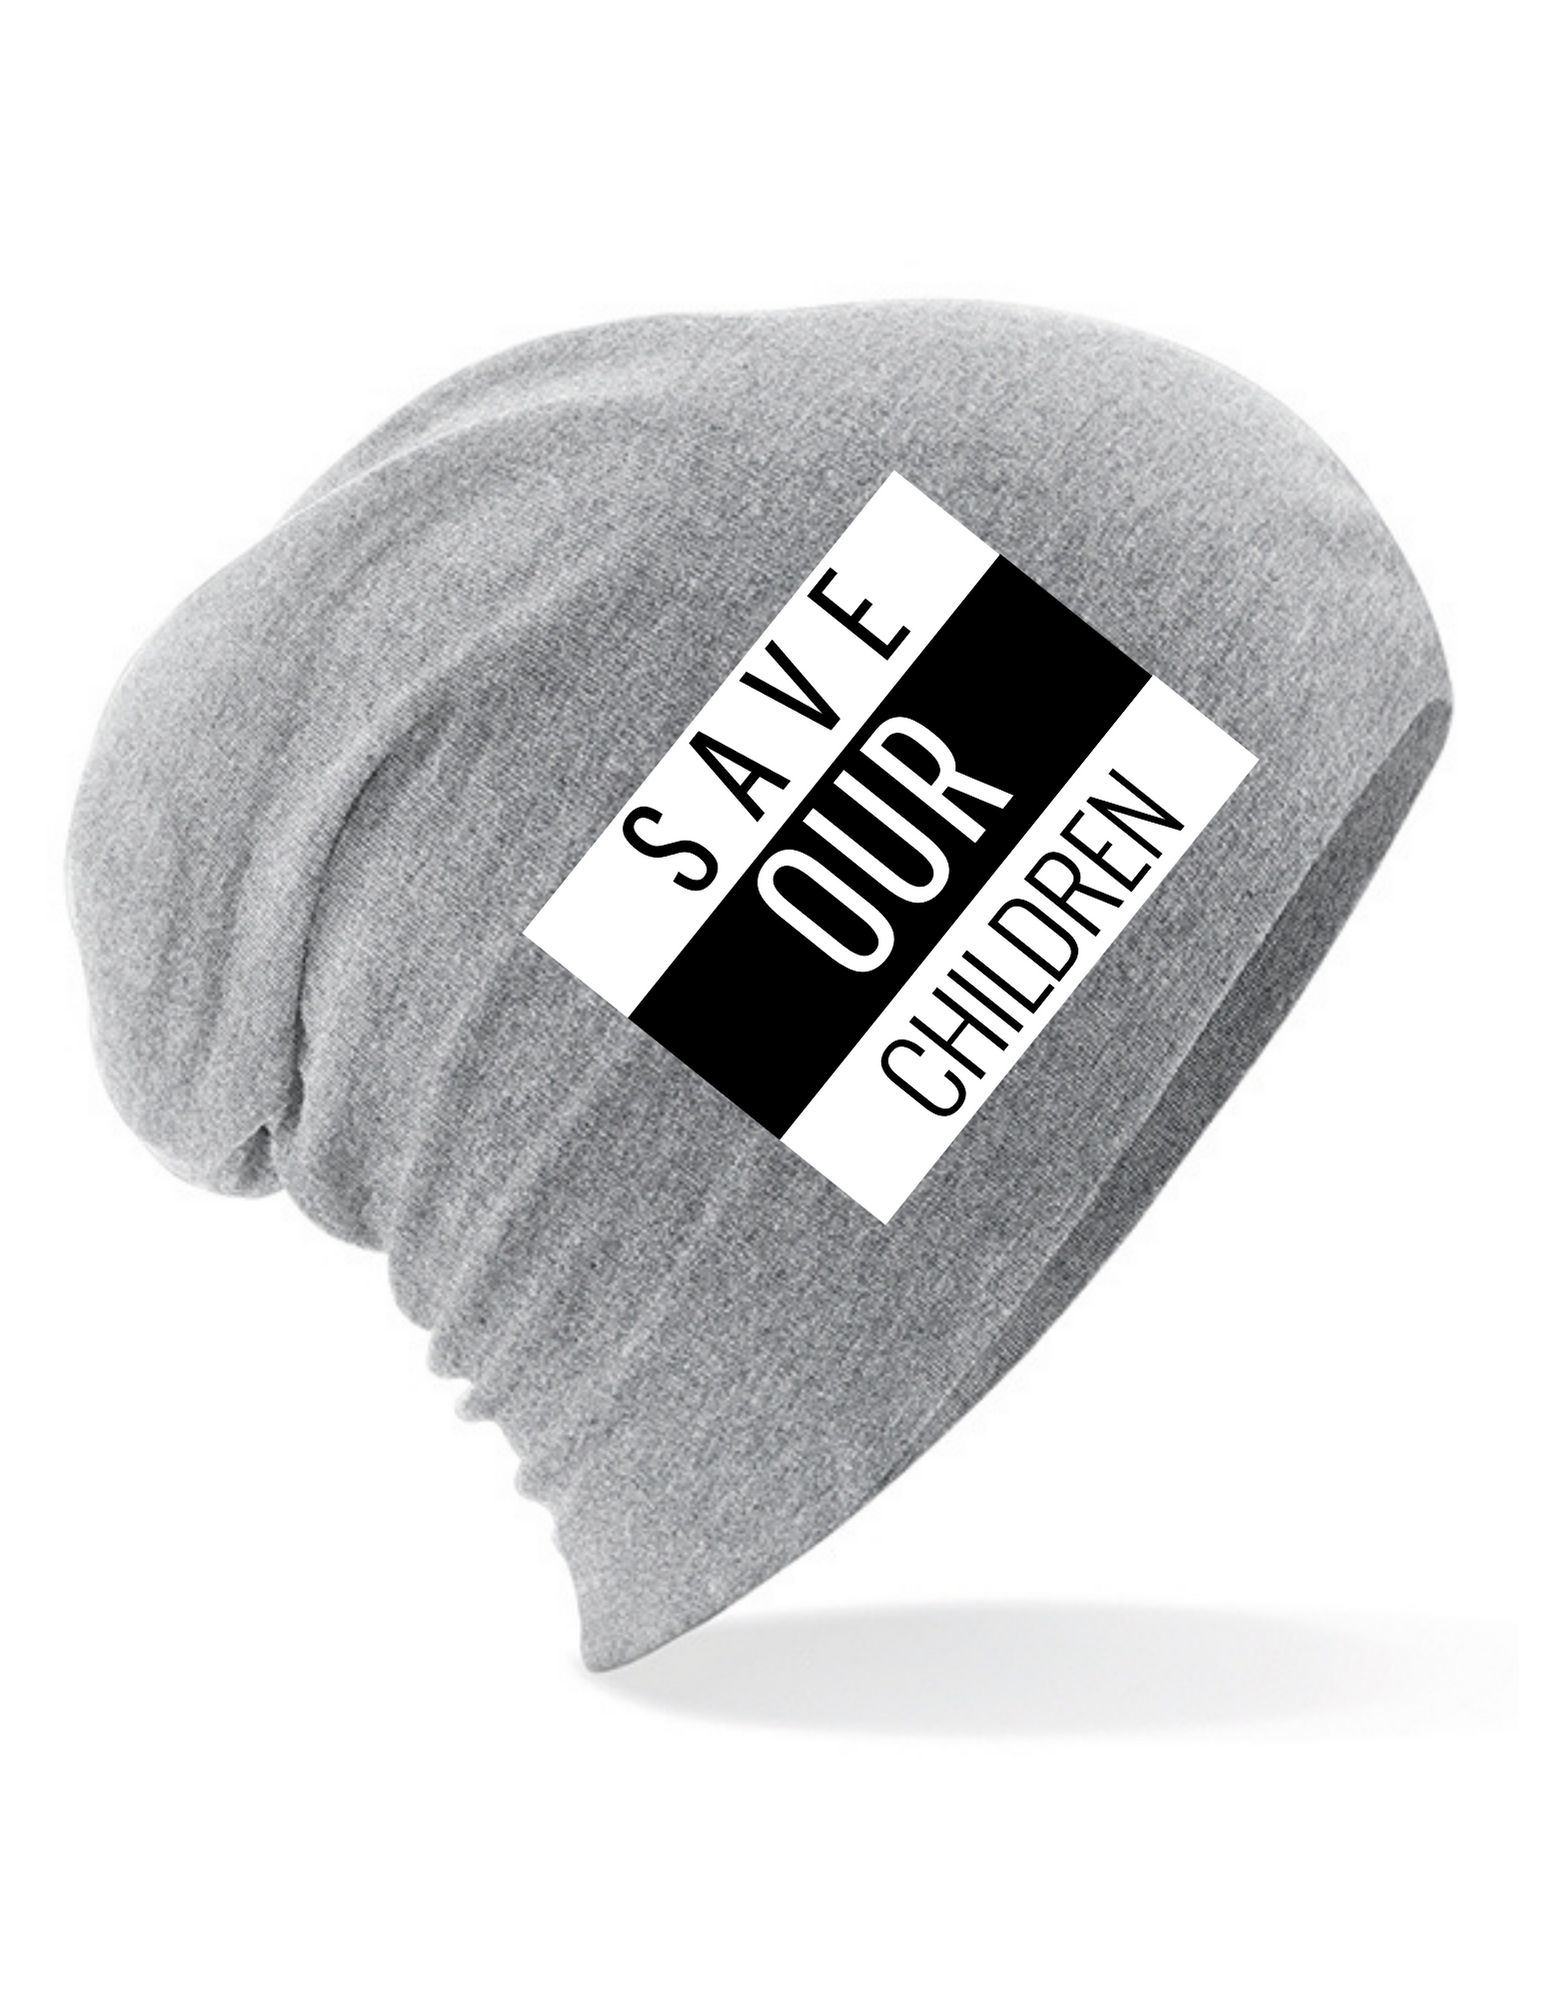 Save Our Children Beanie One Size